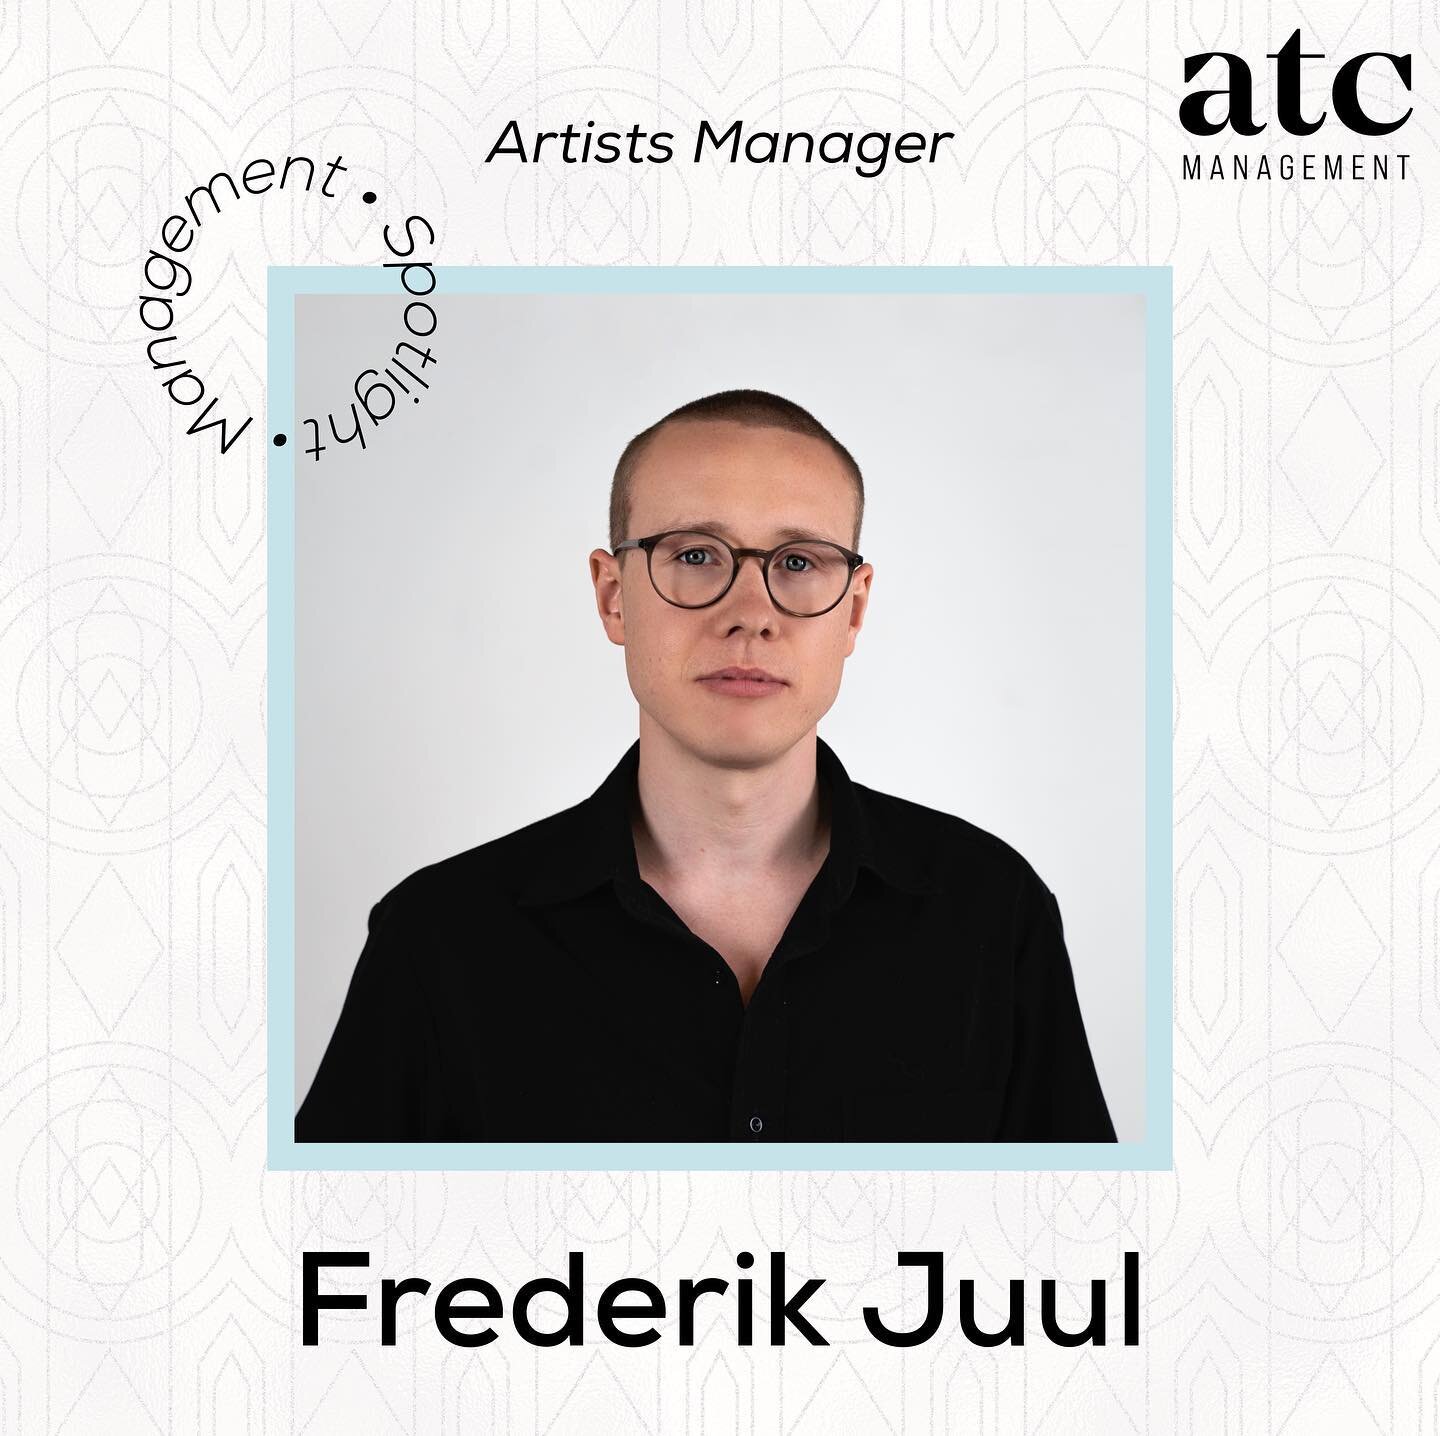 Management Spotlight: Frederik Juul from our Copenhagen office. Swipe to find-out more about Frederik and his music career.. @hyggeministeren 

#ATCManagement #Music #ArtistManagament #Spotlight #Manager #Artist #MusicIndustry #MusicBusiness #LiveMus